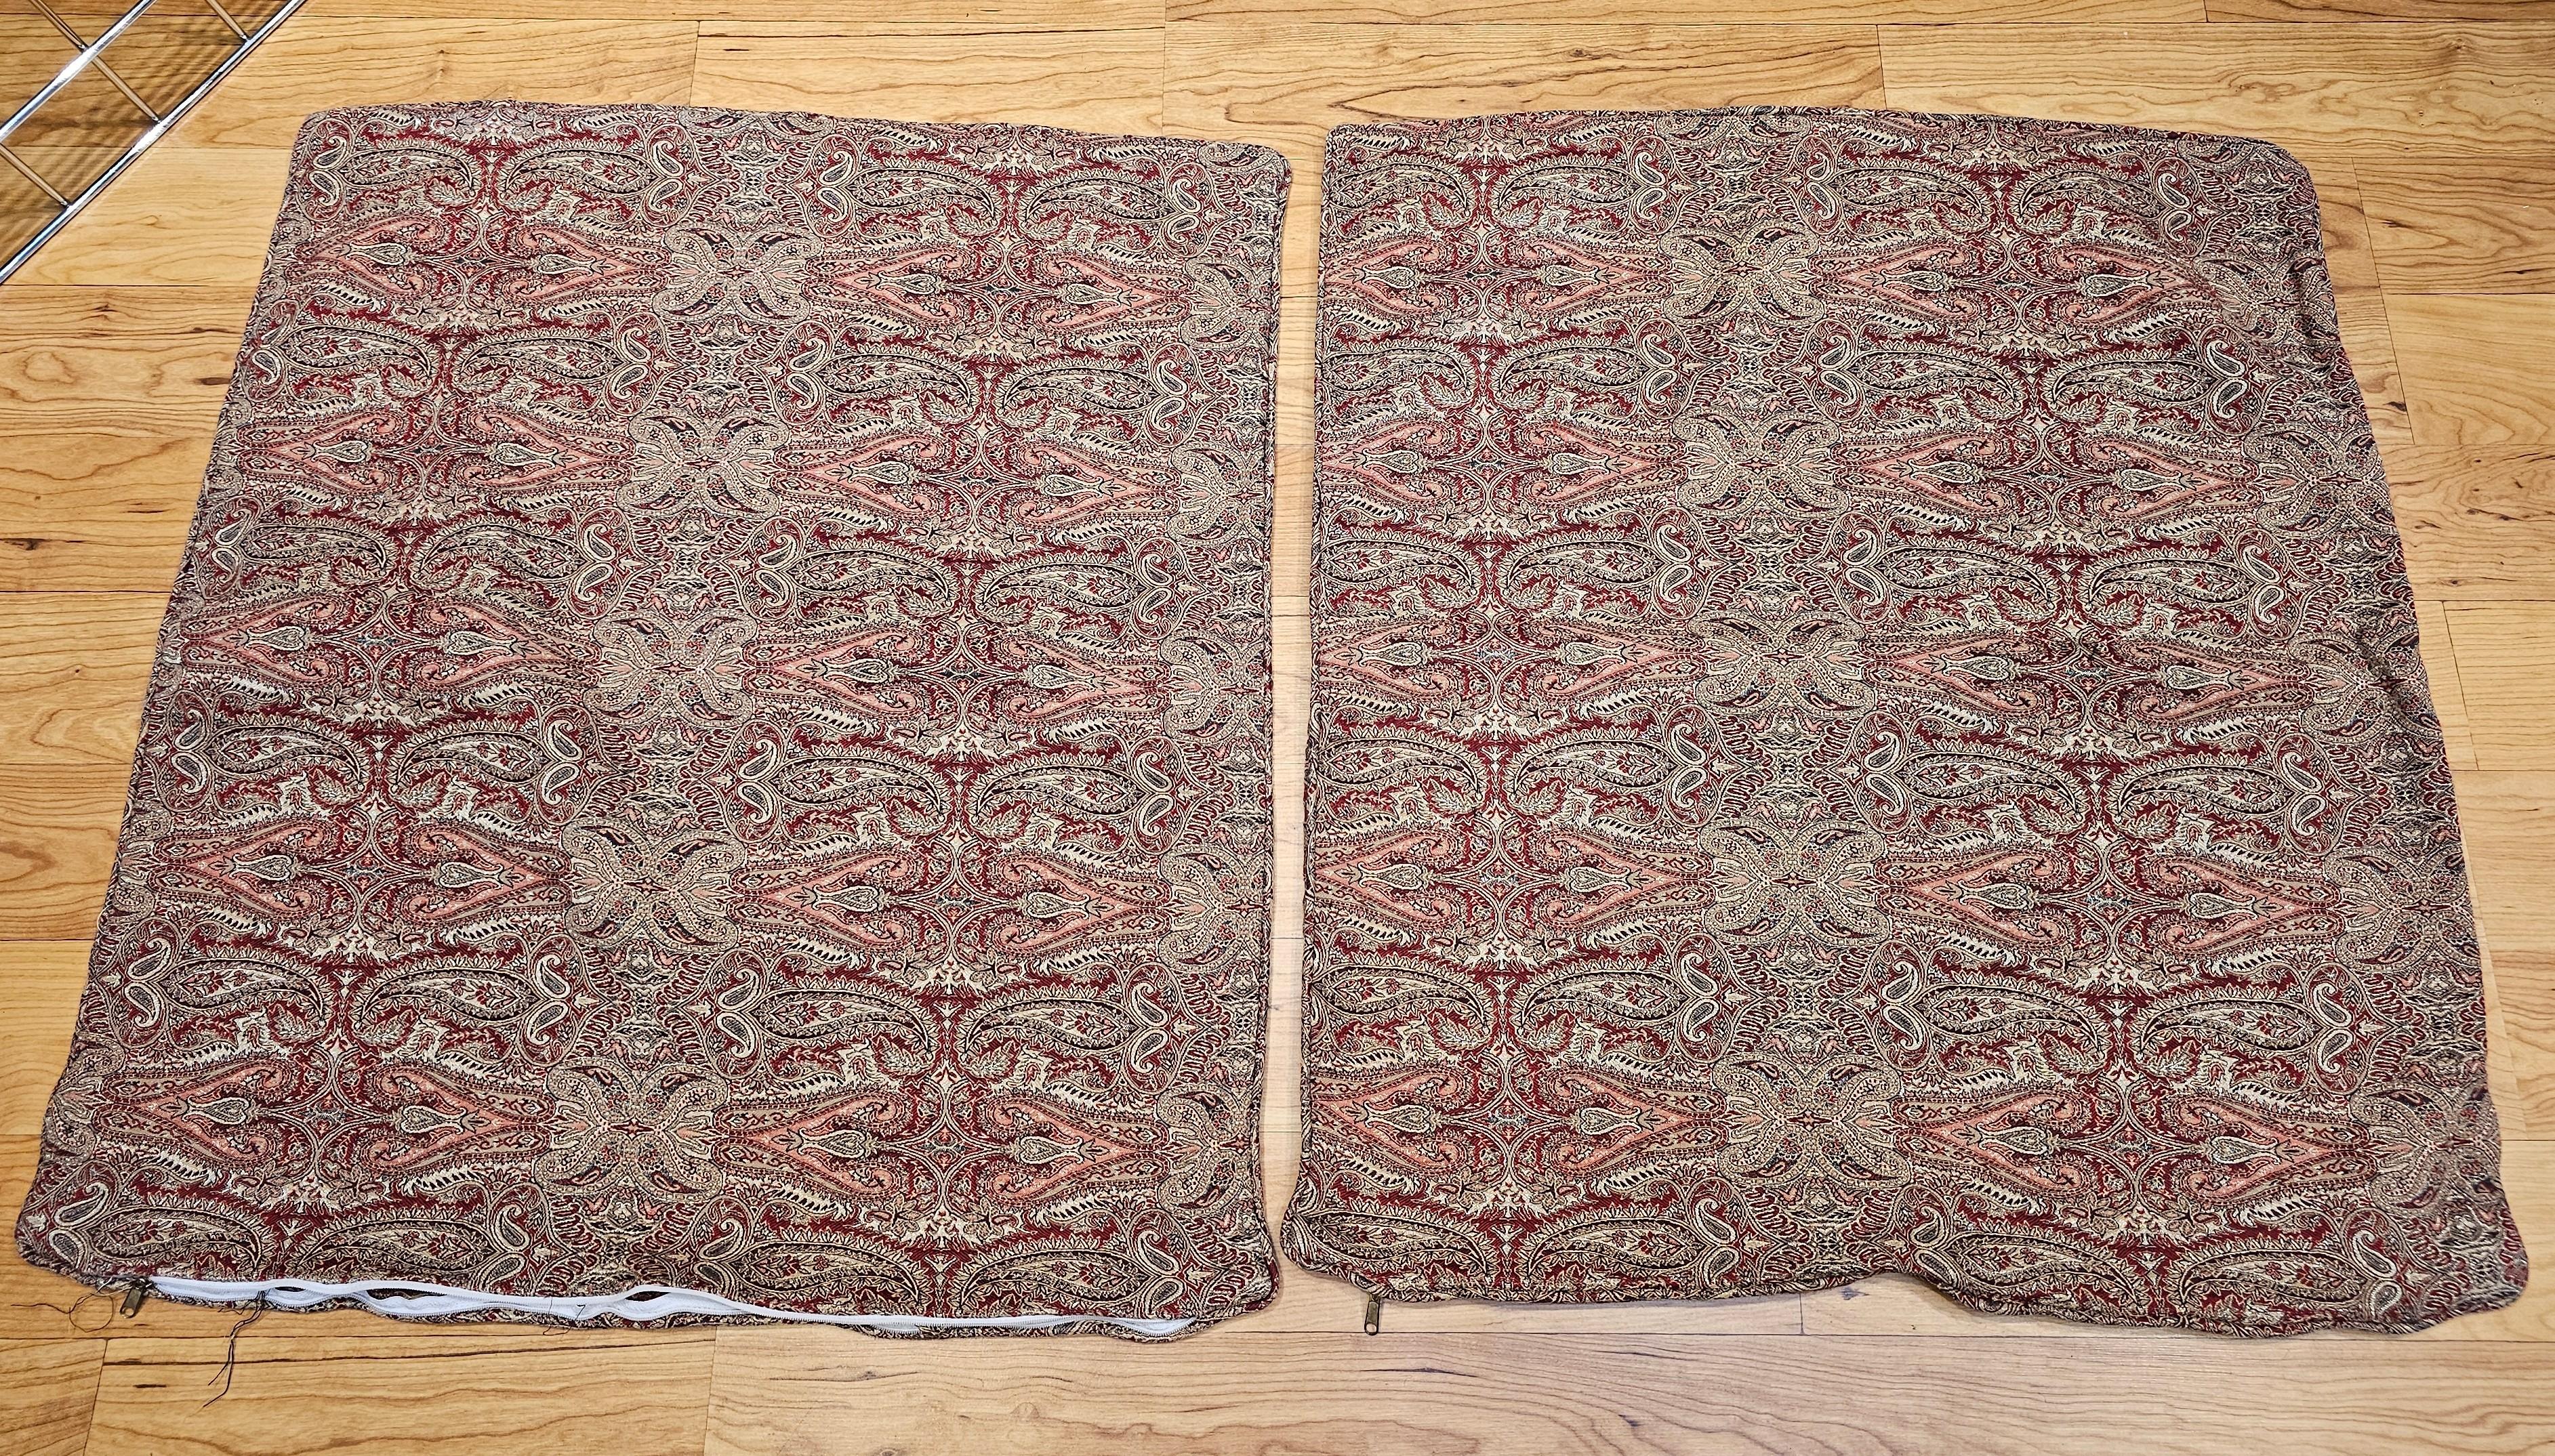 Wool Vintage Paisley Shawl Pillow Cases in Red, Gold, Ivory (A Pair) For Sale